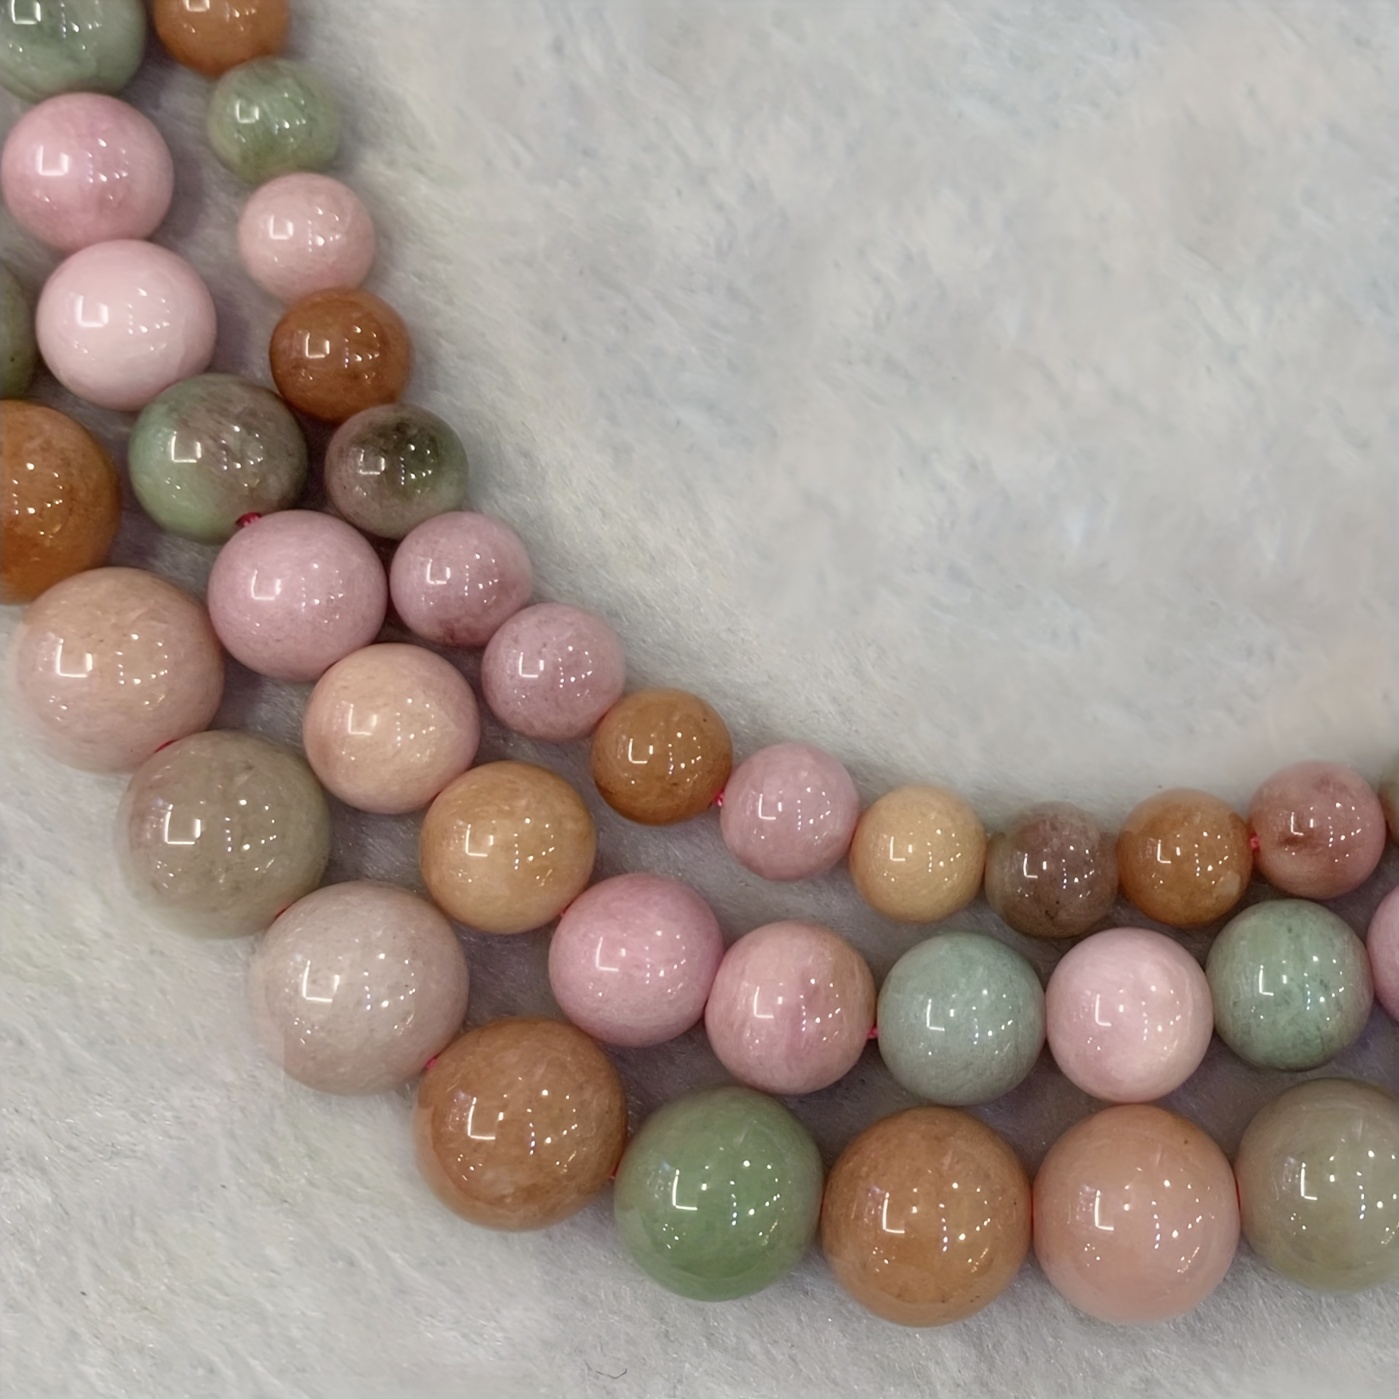 Bacatgem 15 Pcs Color Picasso Jade Large HoleLoose Stone Rondelle Beads Crystals and Healing Stones,6mm DIY-Jewelry Makings